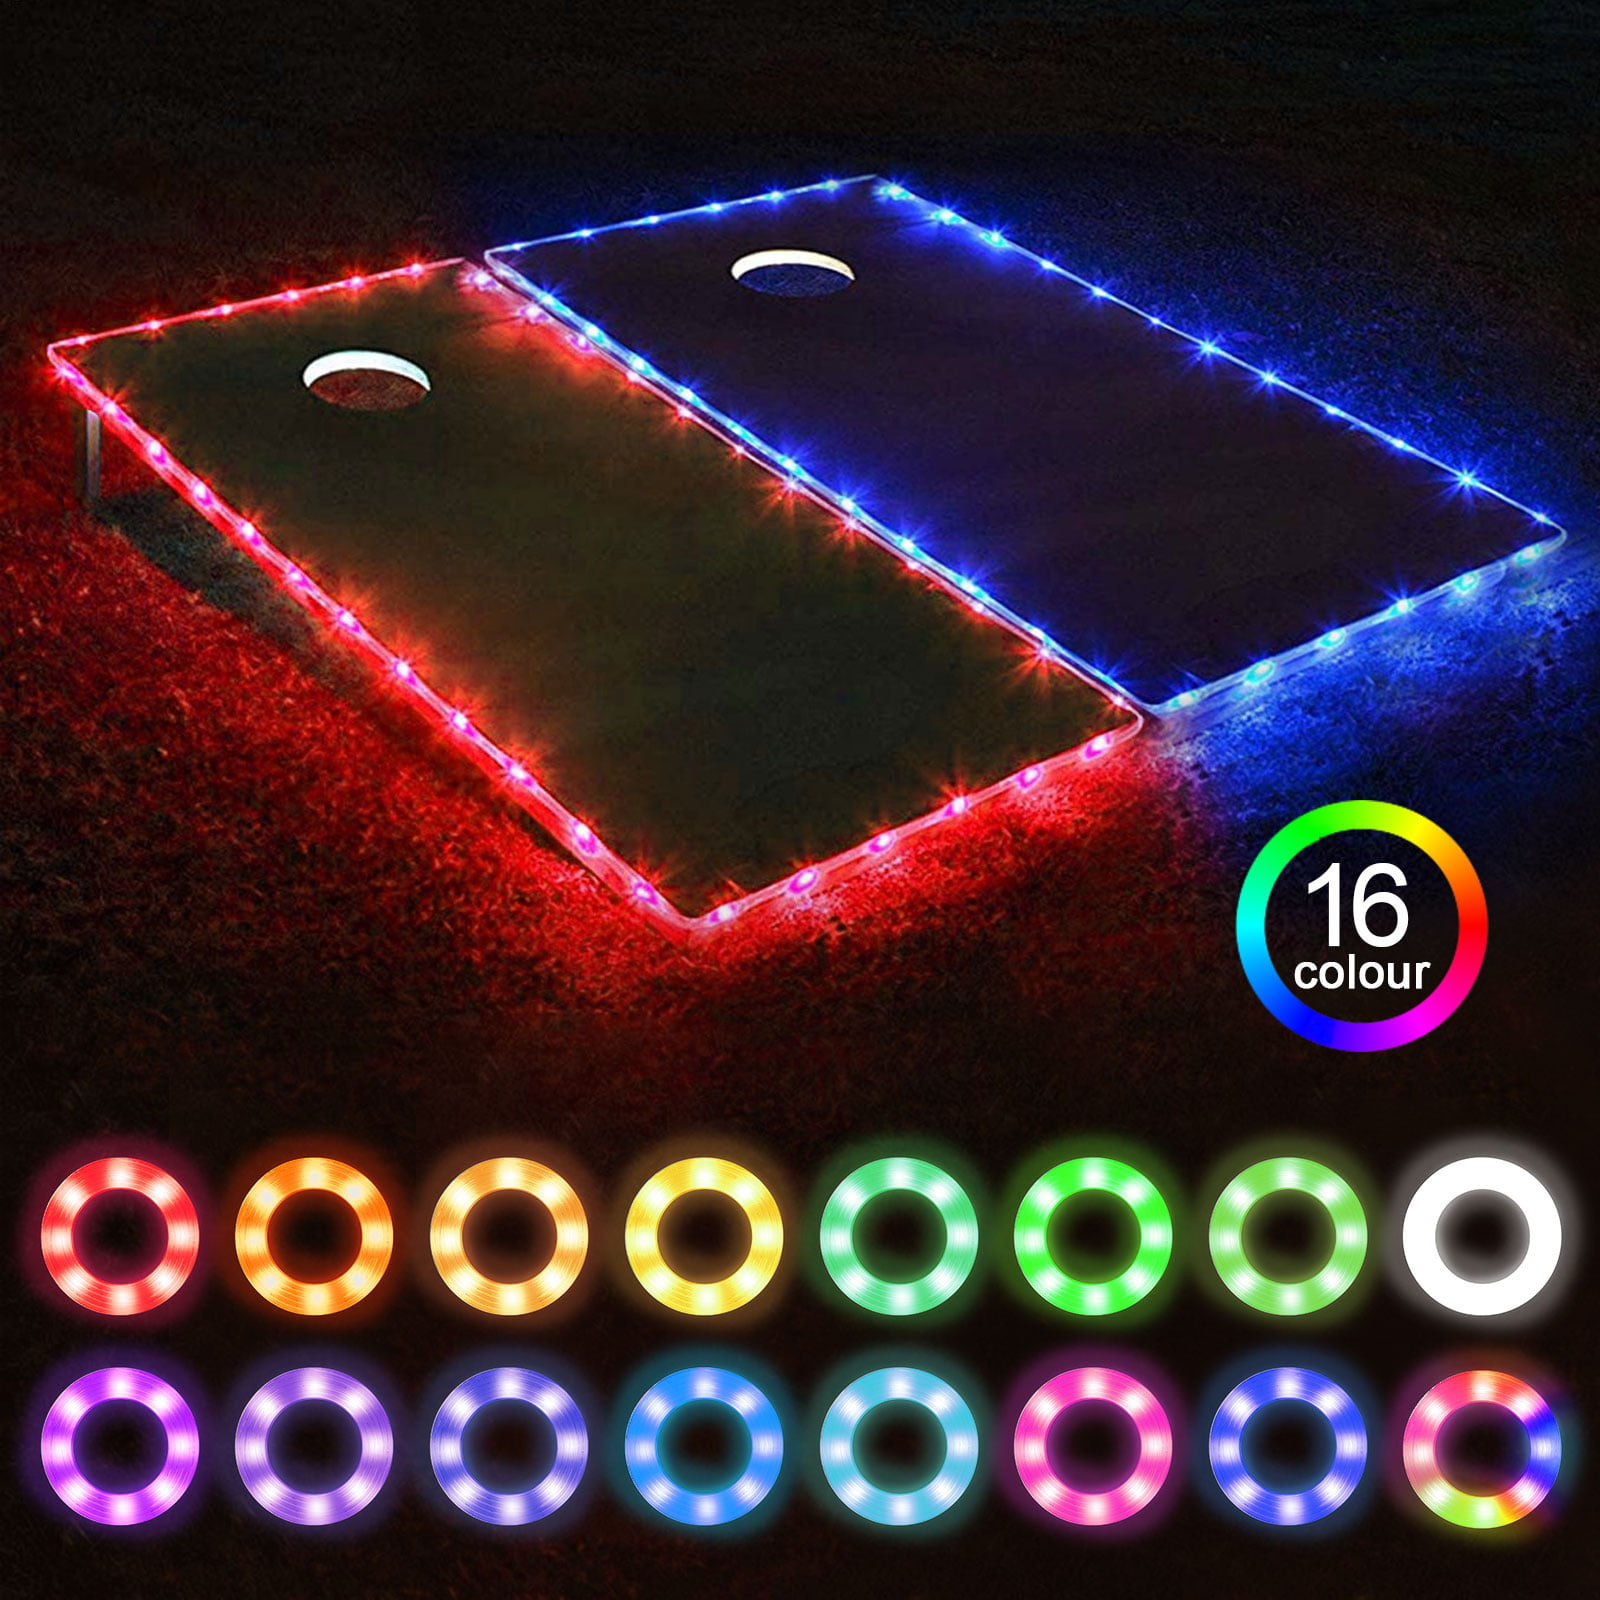 Tailgating Pros Premium Cornhole Board Edge Light Set w/Waterproof Battery Packs and Mounting Hardware 12 Foot LED Rope 5 Color Options